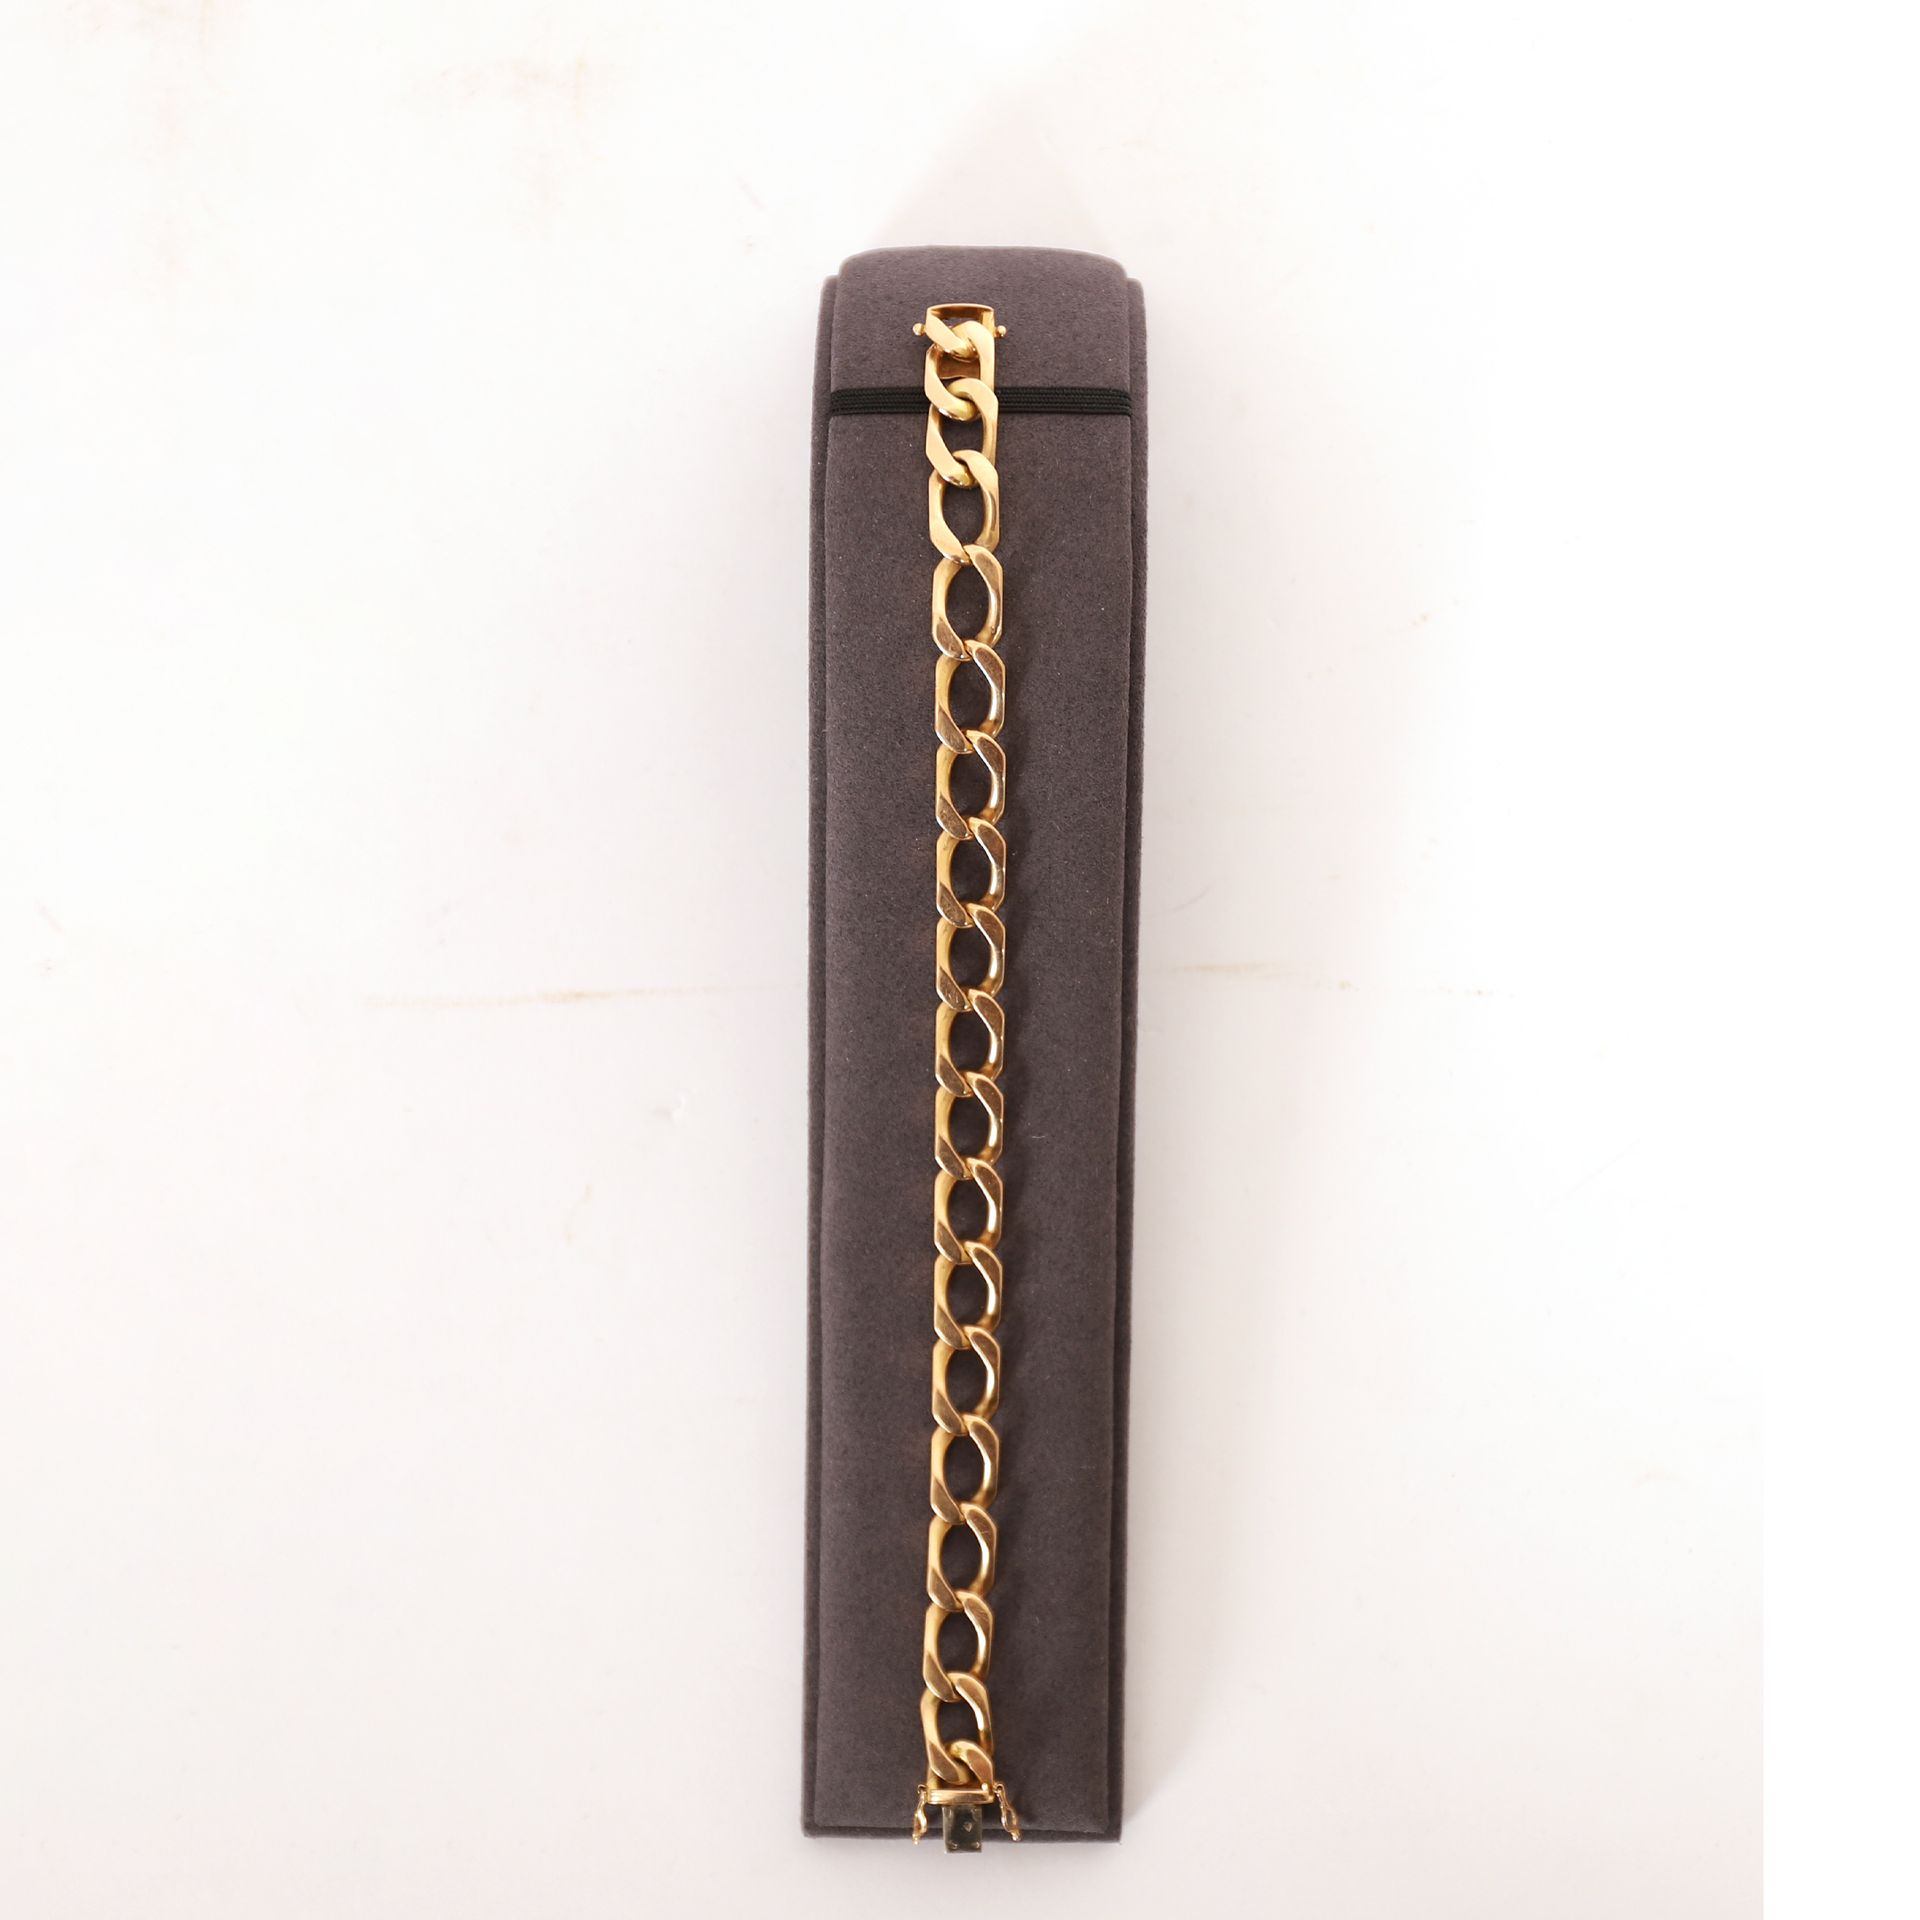 Null GOLD BRACELET WITH LARGE MESH

L : 22 cm

Weight : 39 grs